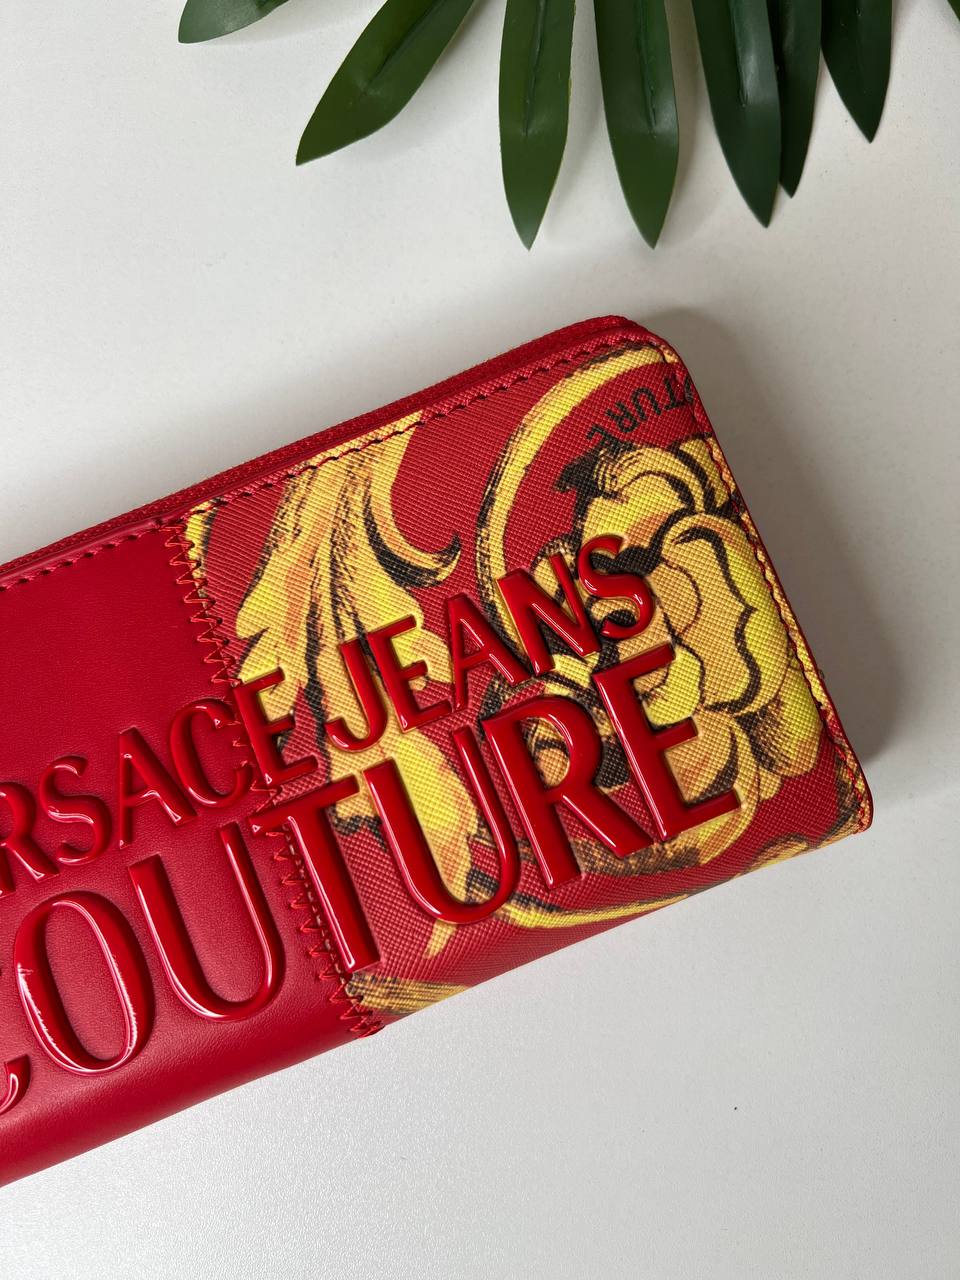 Versace Jeans Couture Red Wallet